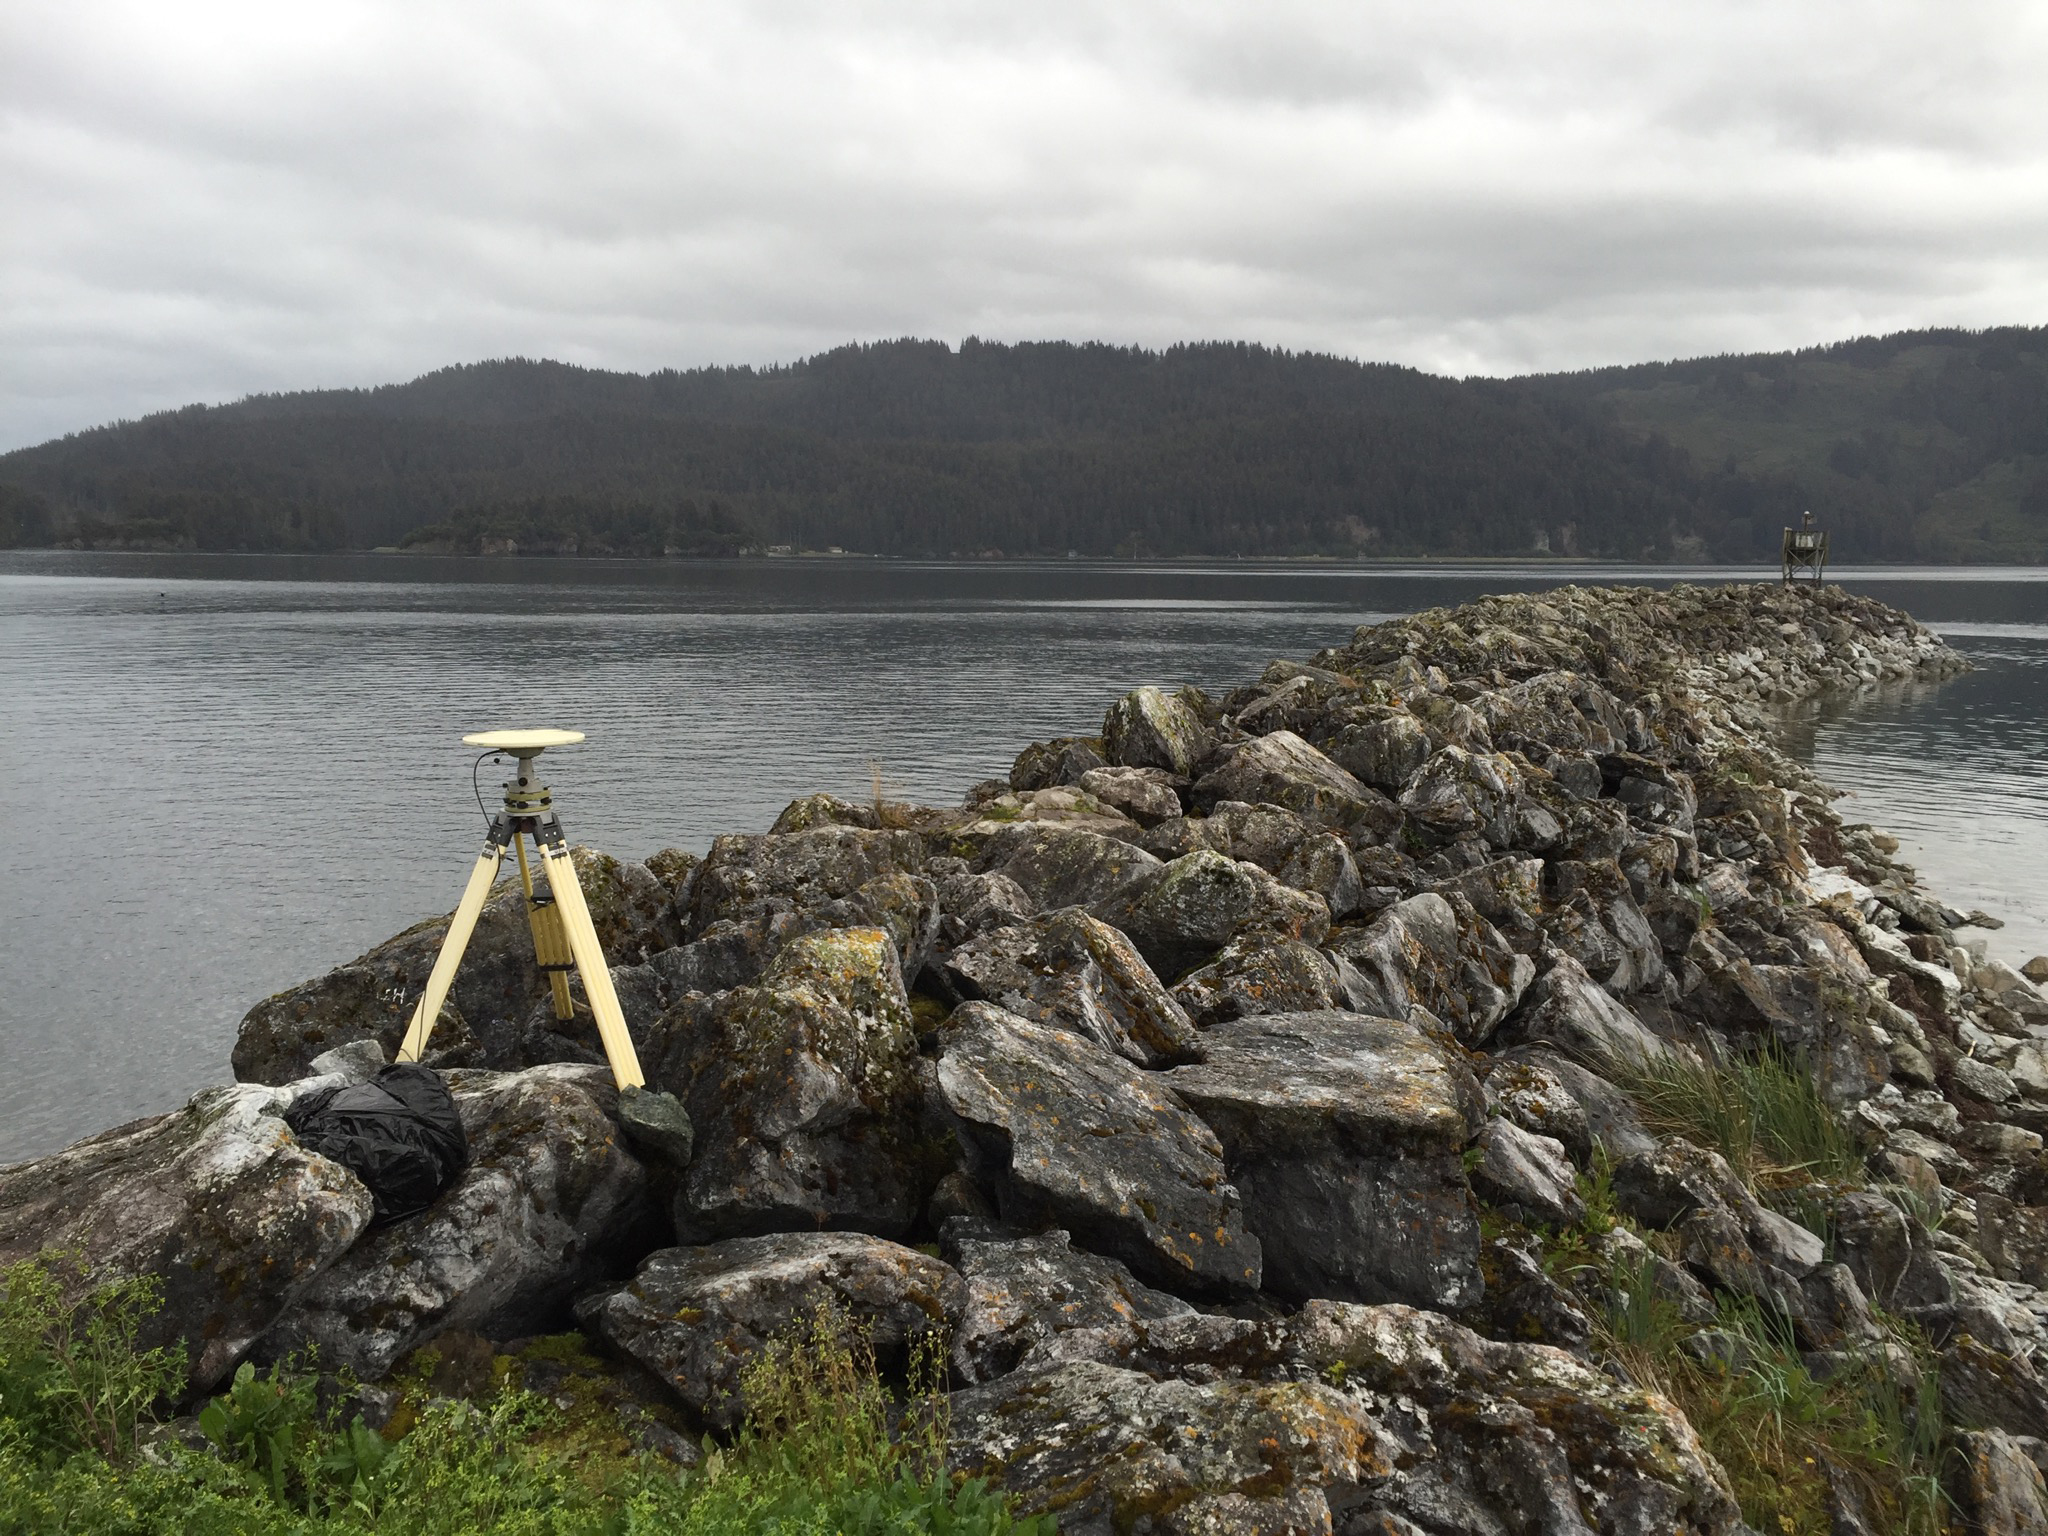 NOAA National Geodetic Survey instrument used for the reestablishment of height on a tidal benchmark in Seldovia, Alaska, a tectonically active area.